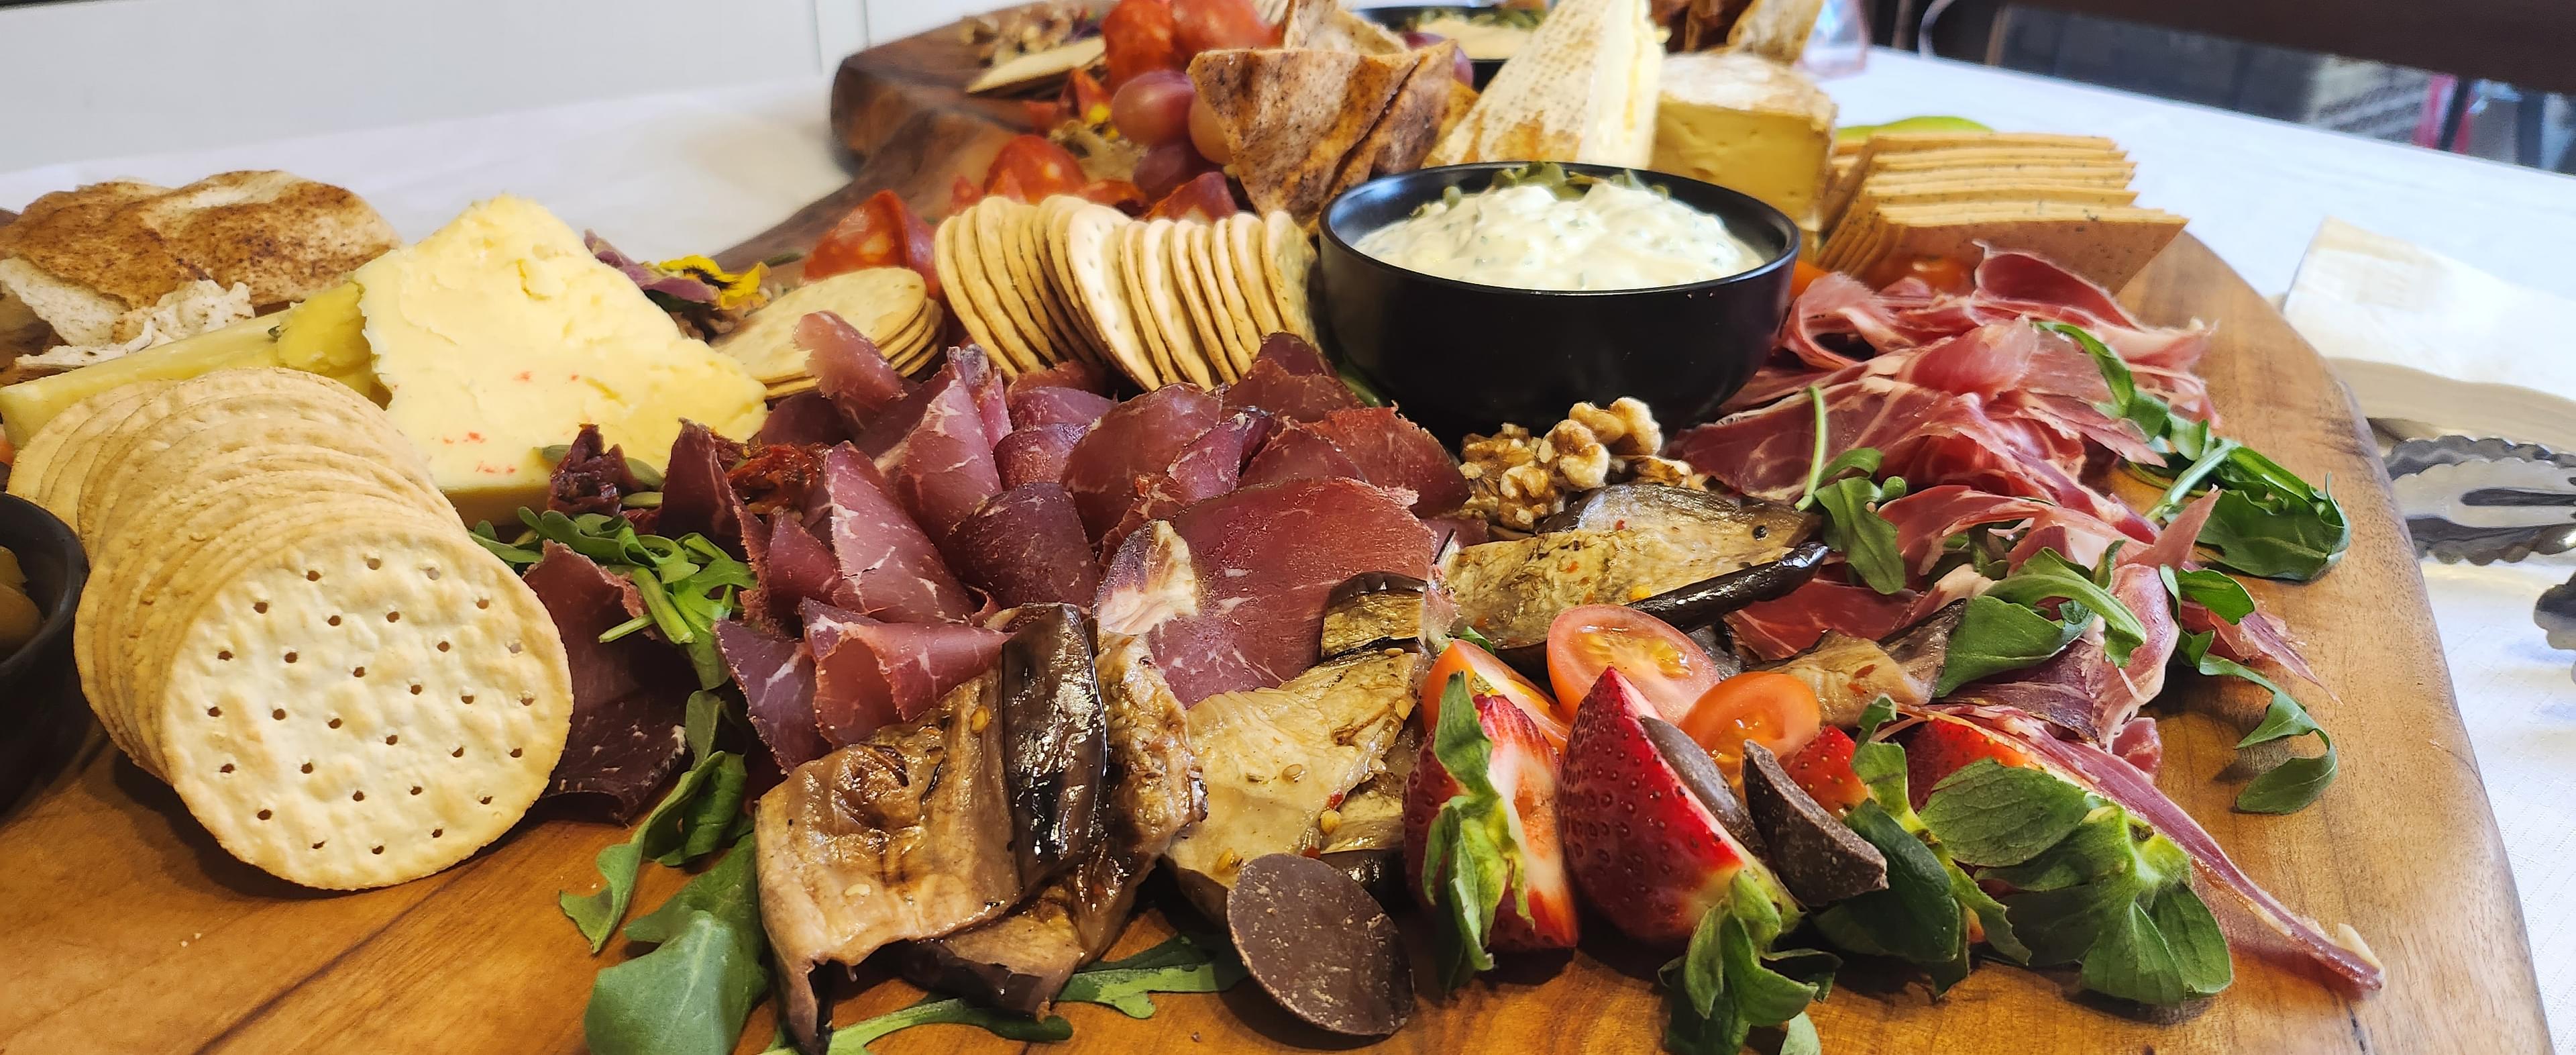 The Antipasto Table